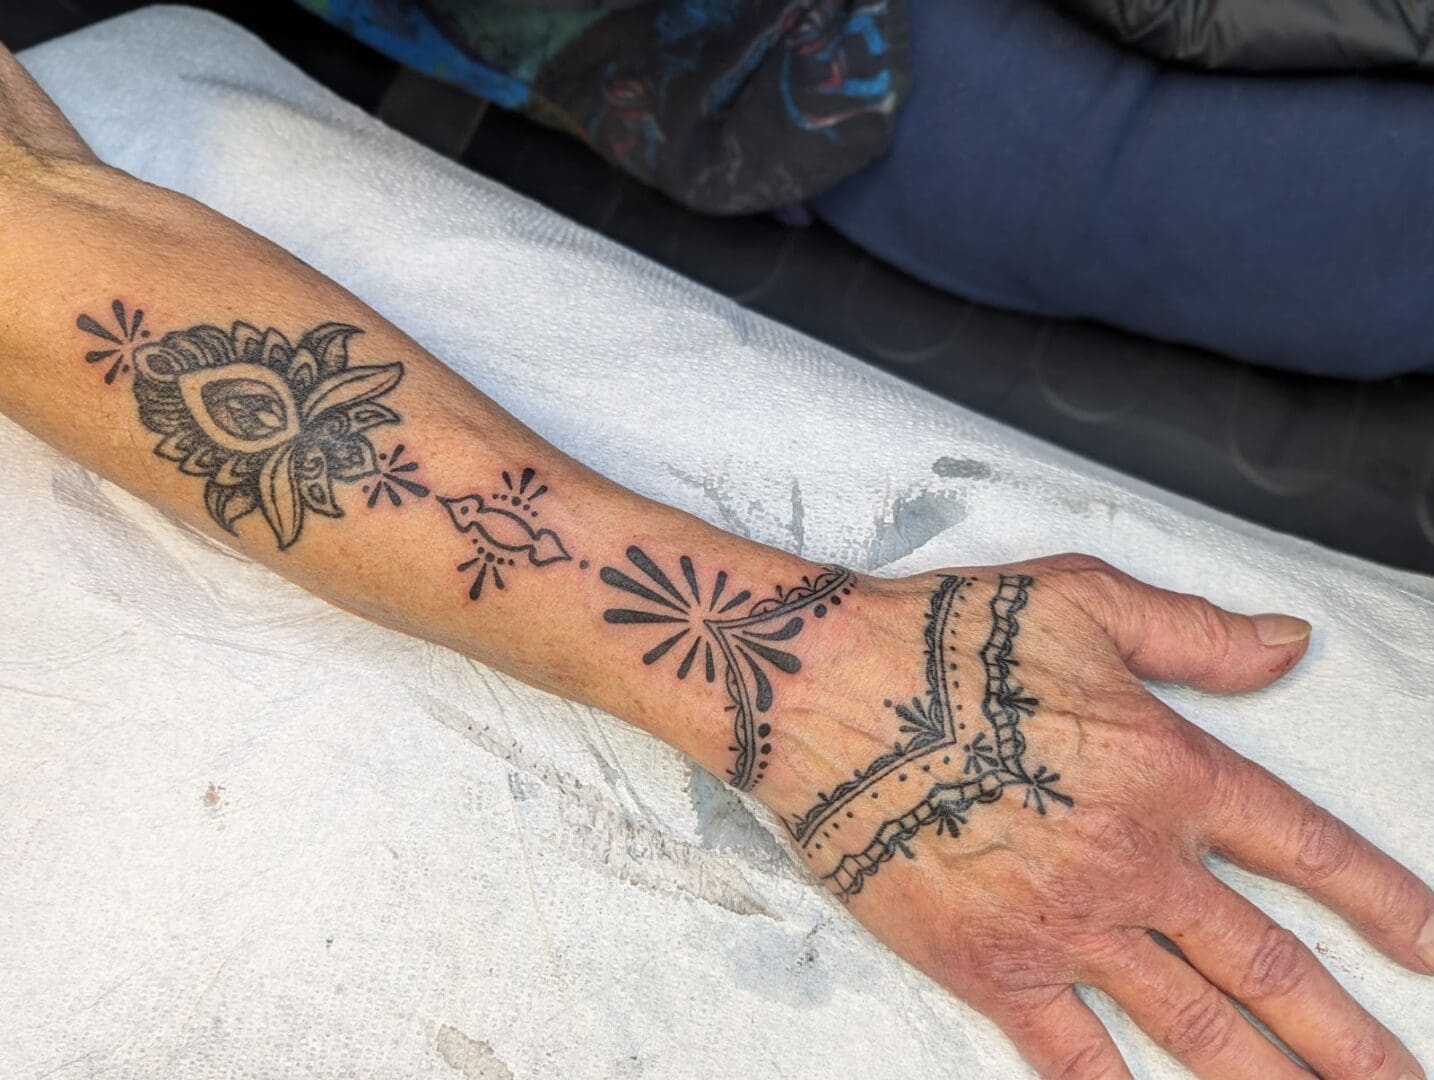 A person with tattoos on their arm and hand.